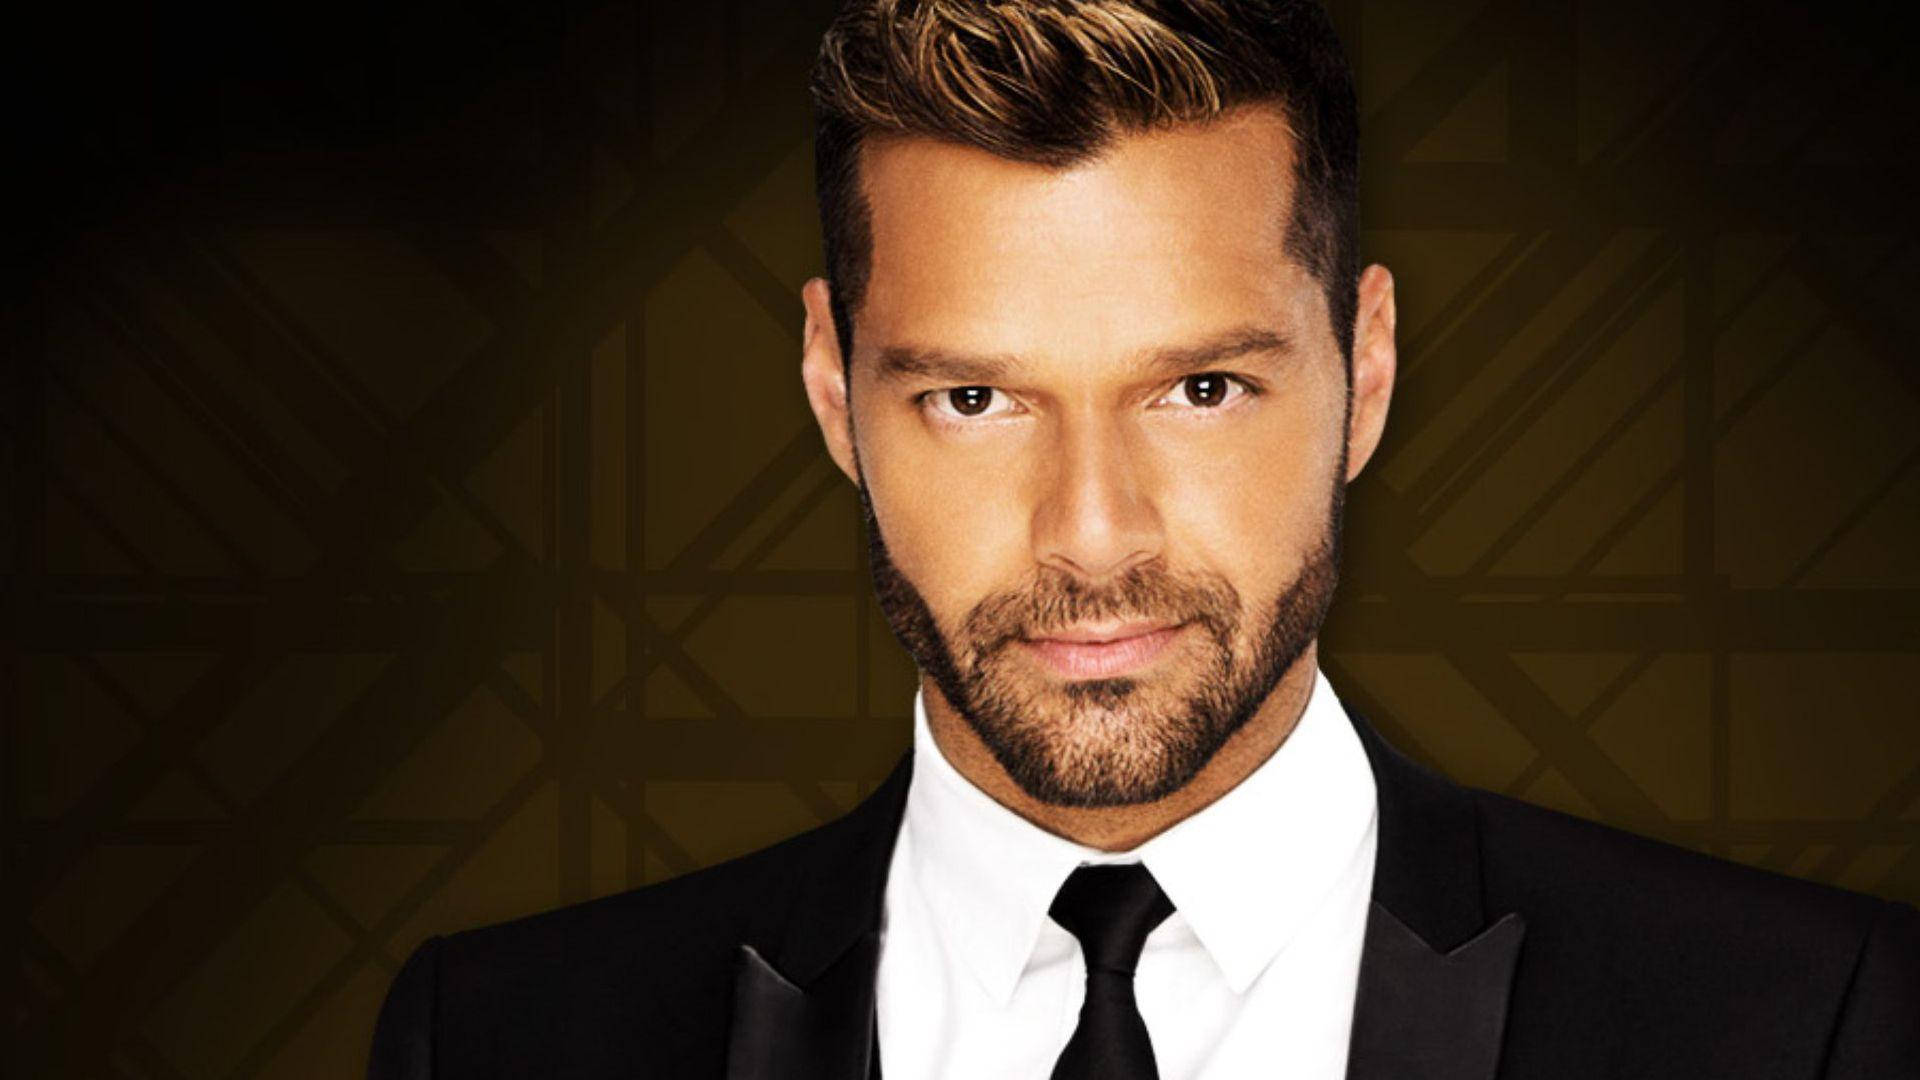 Ricky Martin Serious Look Background